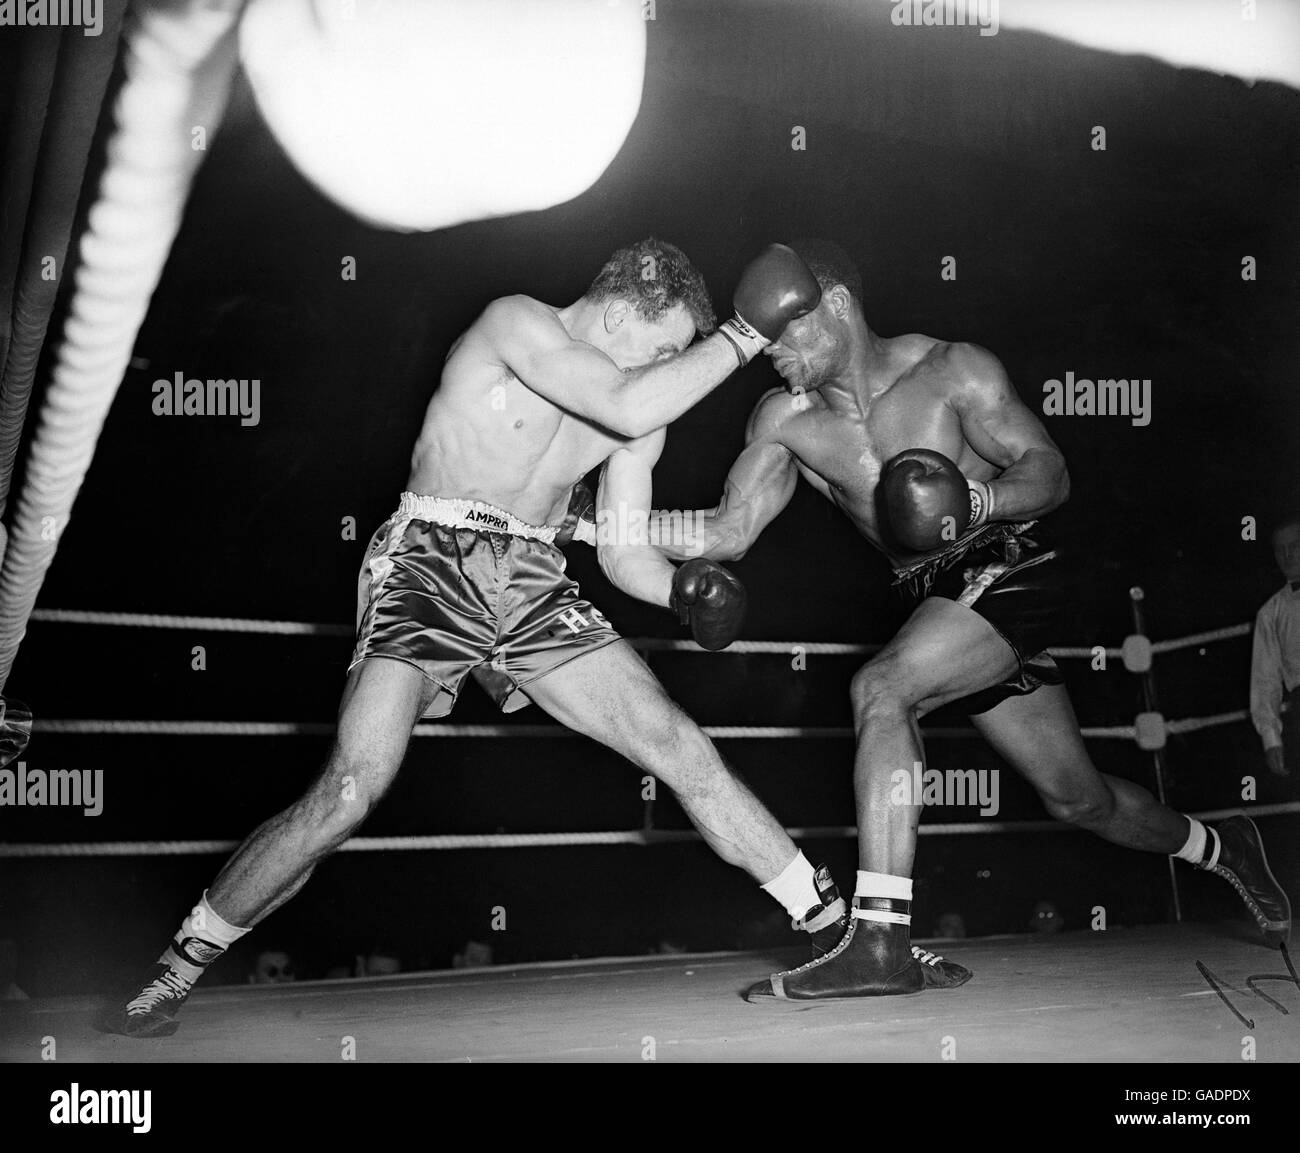 Boxing - British Empire Heavyweight Championship - Henry Cooper v Joe Bygraves. Joe Bygraves (r) hurts Henry Cooper (l) with a right to the body Stock Photo